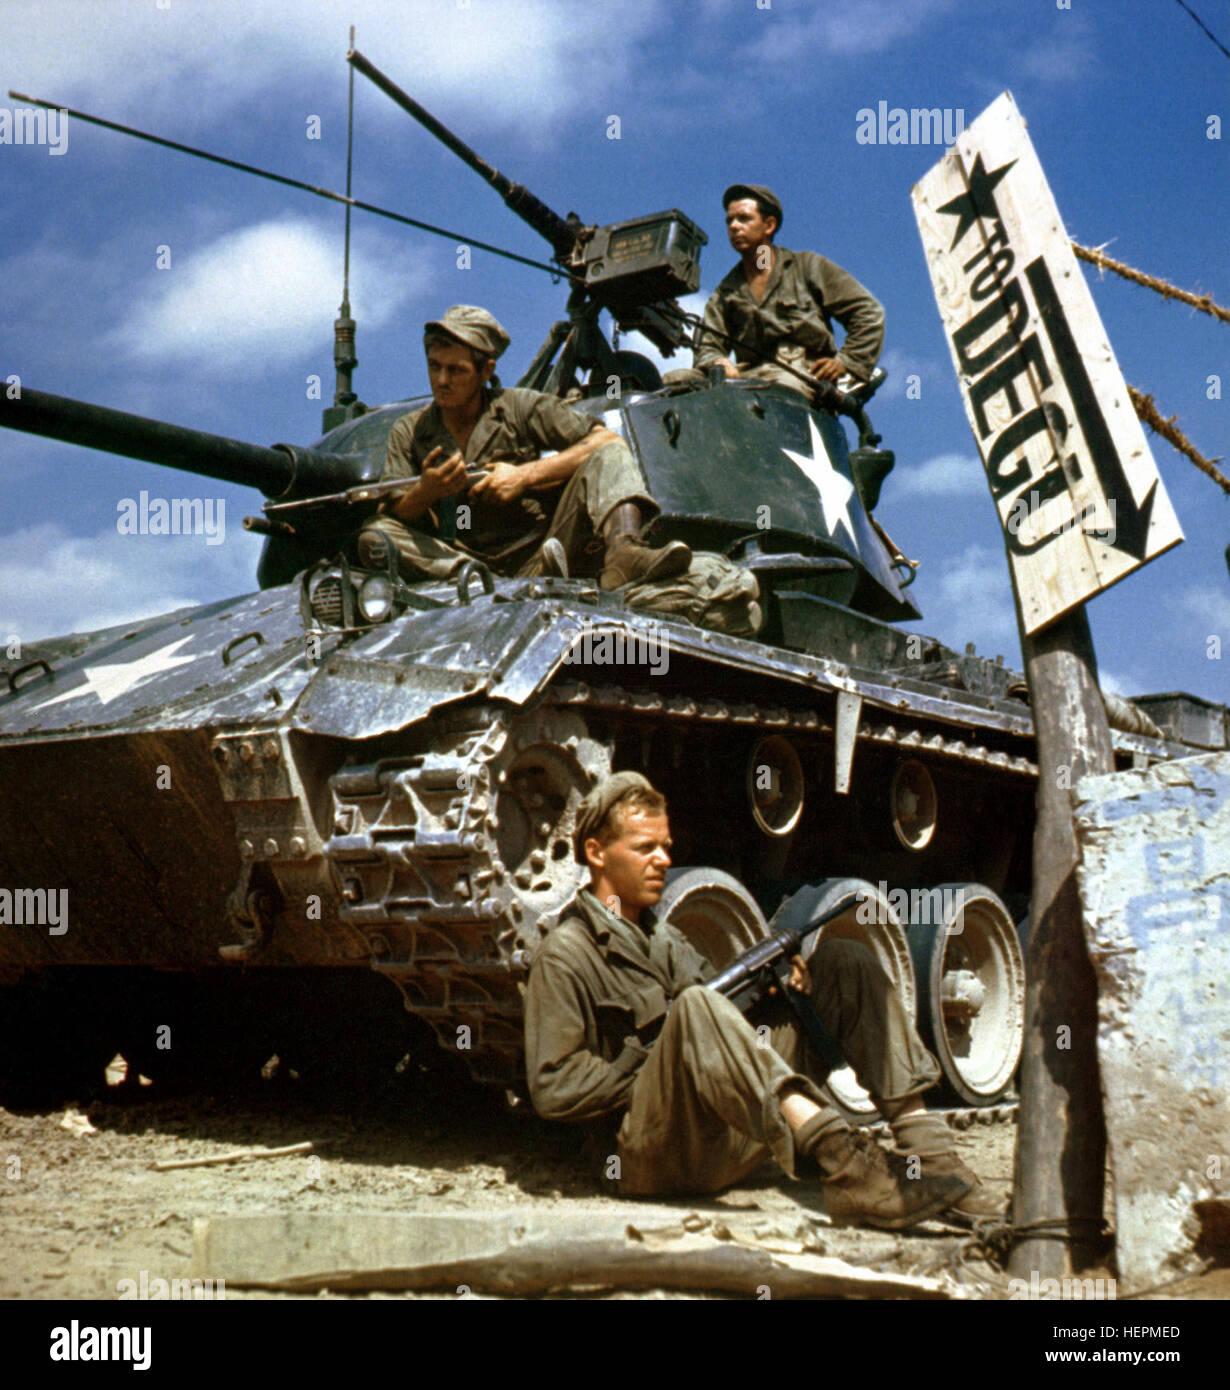 Crew of an M-24 tank along the Naktong River front.  On the ground is Pfc. Rudolph Dotts, Egg Harbor City, N.J. gunner (center); Pvt. Maynard Linaweaver, Lundsburg, Kansas, cannoner; and on top is Pfc. Hugh Goodwin, Decature, Miss., tank commander. All are members of the 24th Reconnaissance, 24th Division. NARA FILE#:  111-C-6061 HA-SC-98-06983-Crew of M24 along Naktong River front-Korean war-17 Aug 1950 Stock Photo